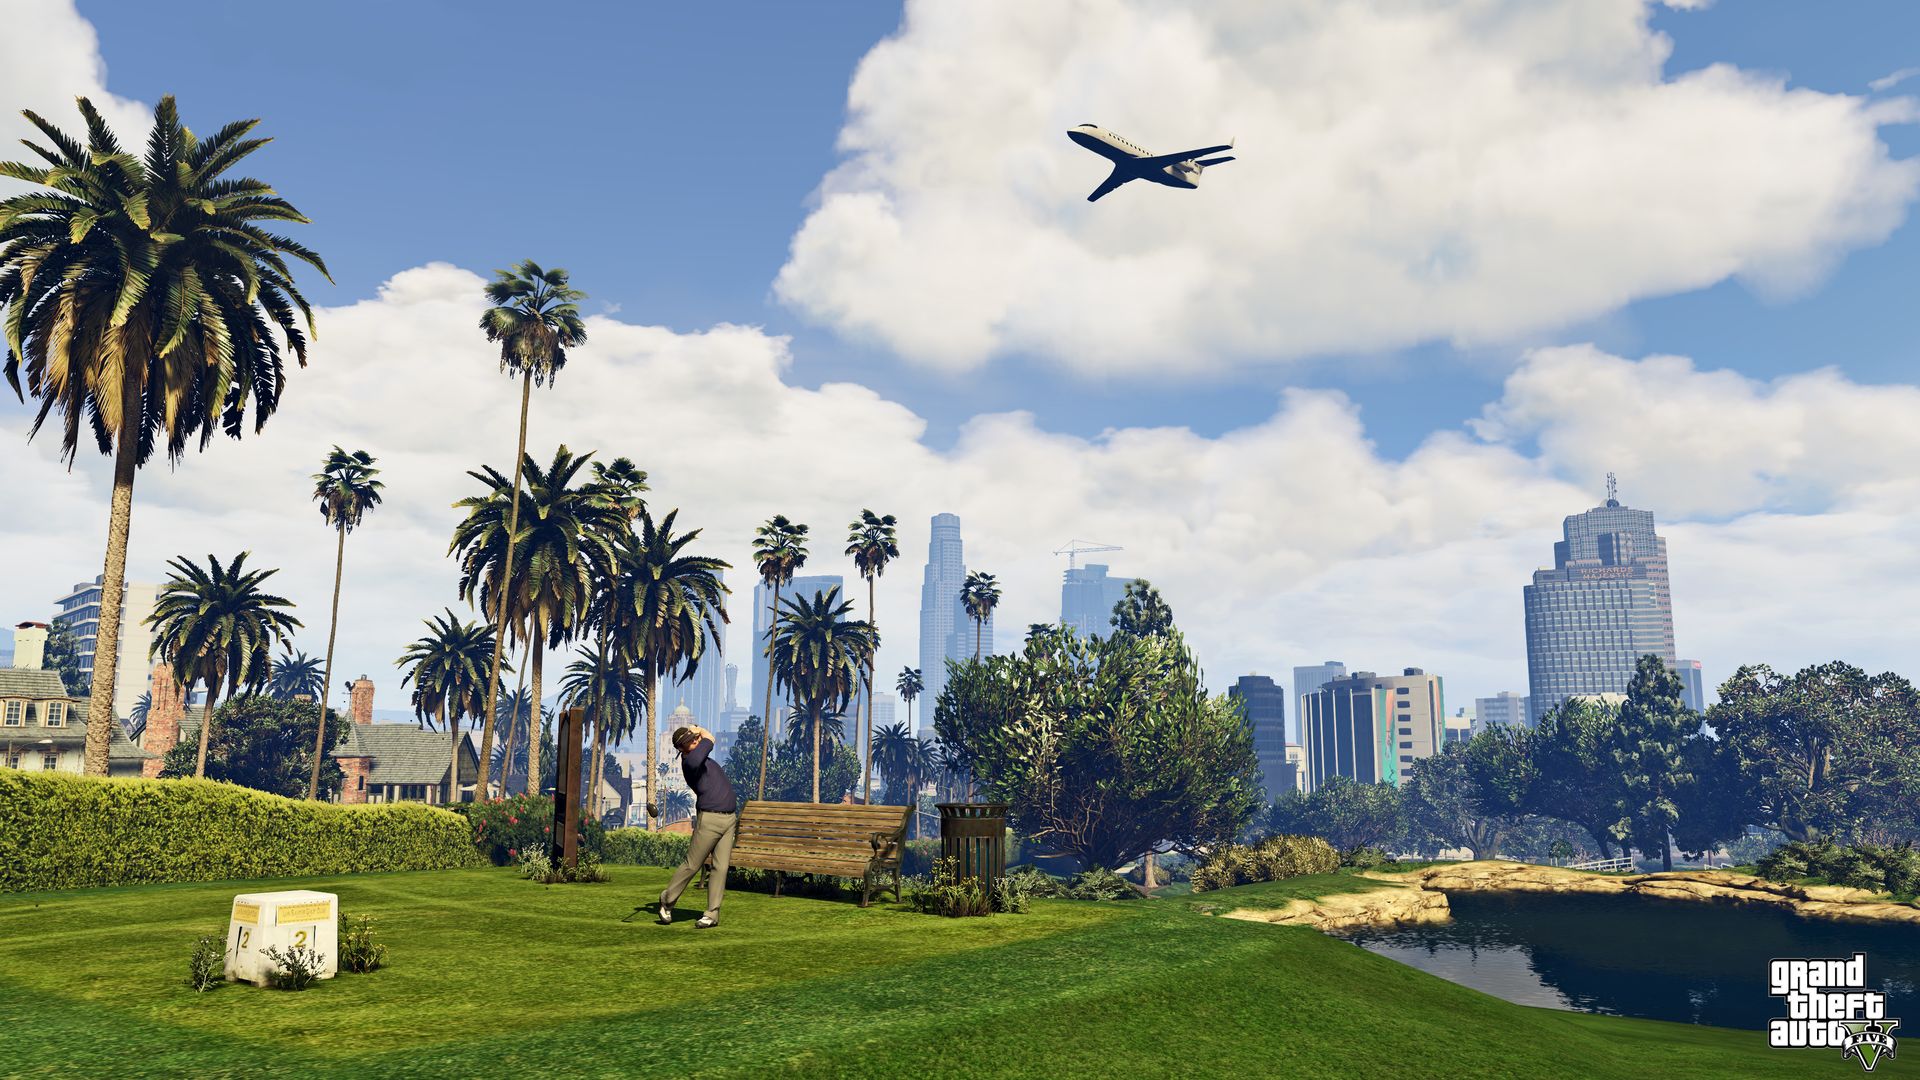 Video game screenshot of a man swinging a club on a golf course while a plane flies overhead